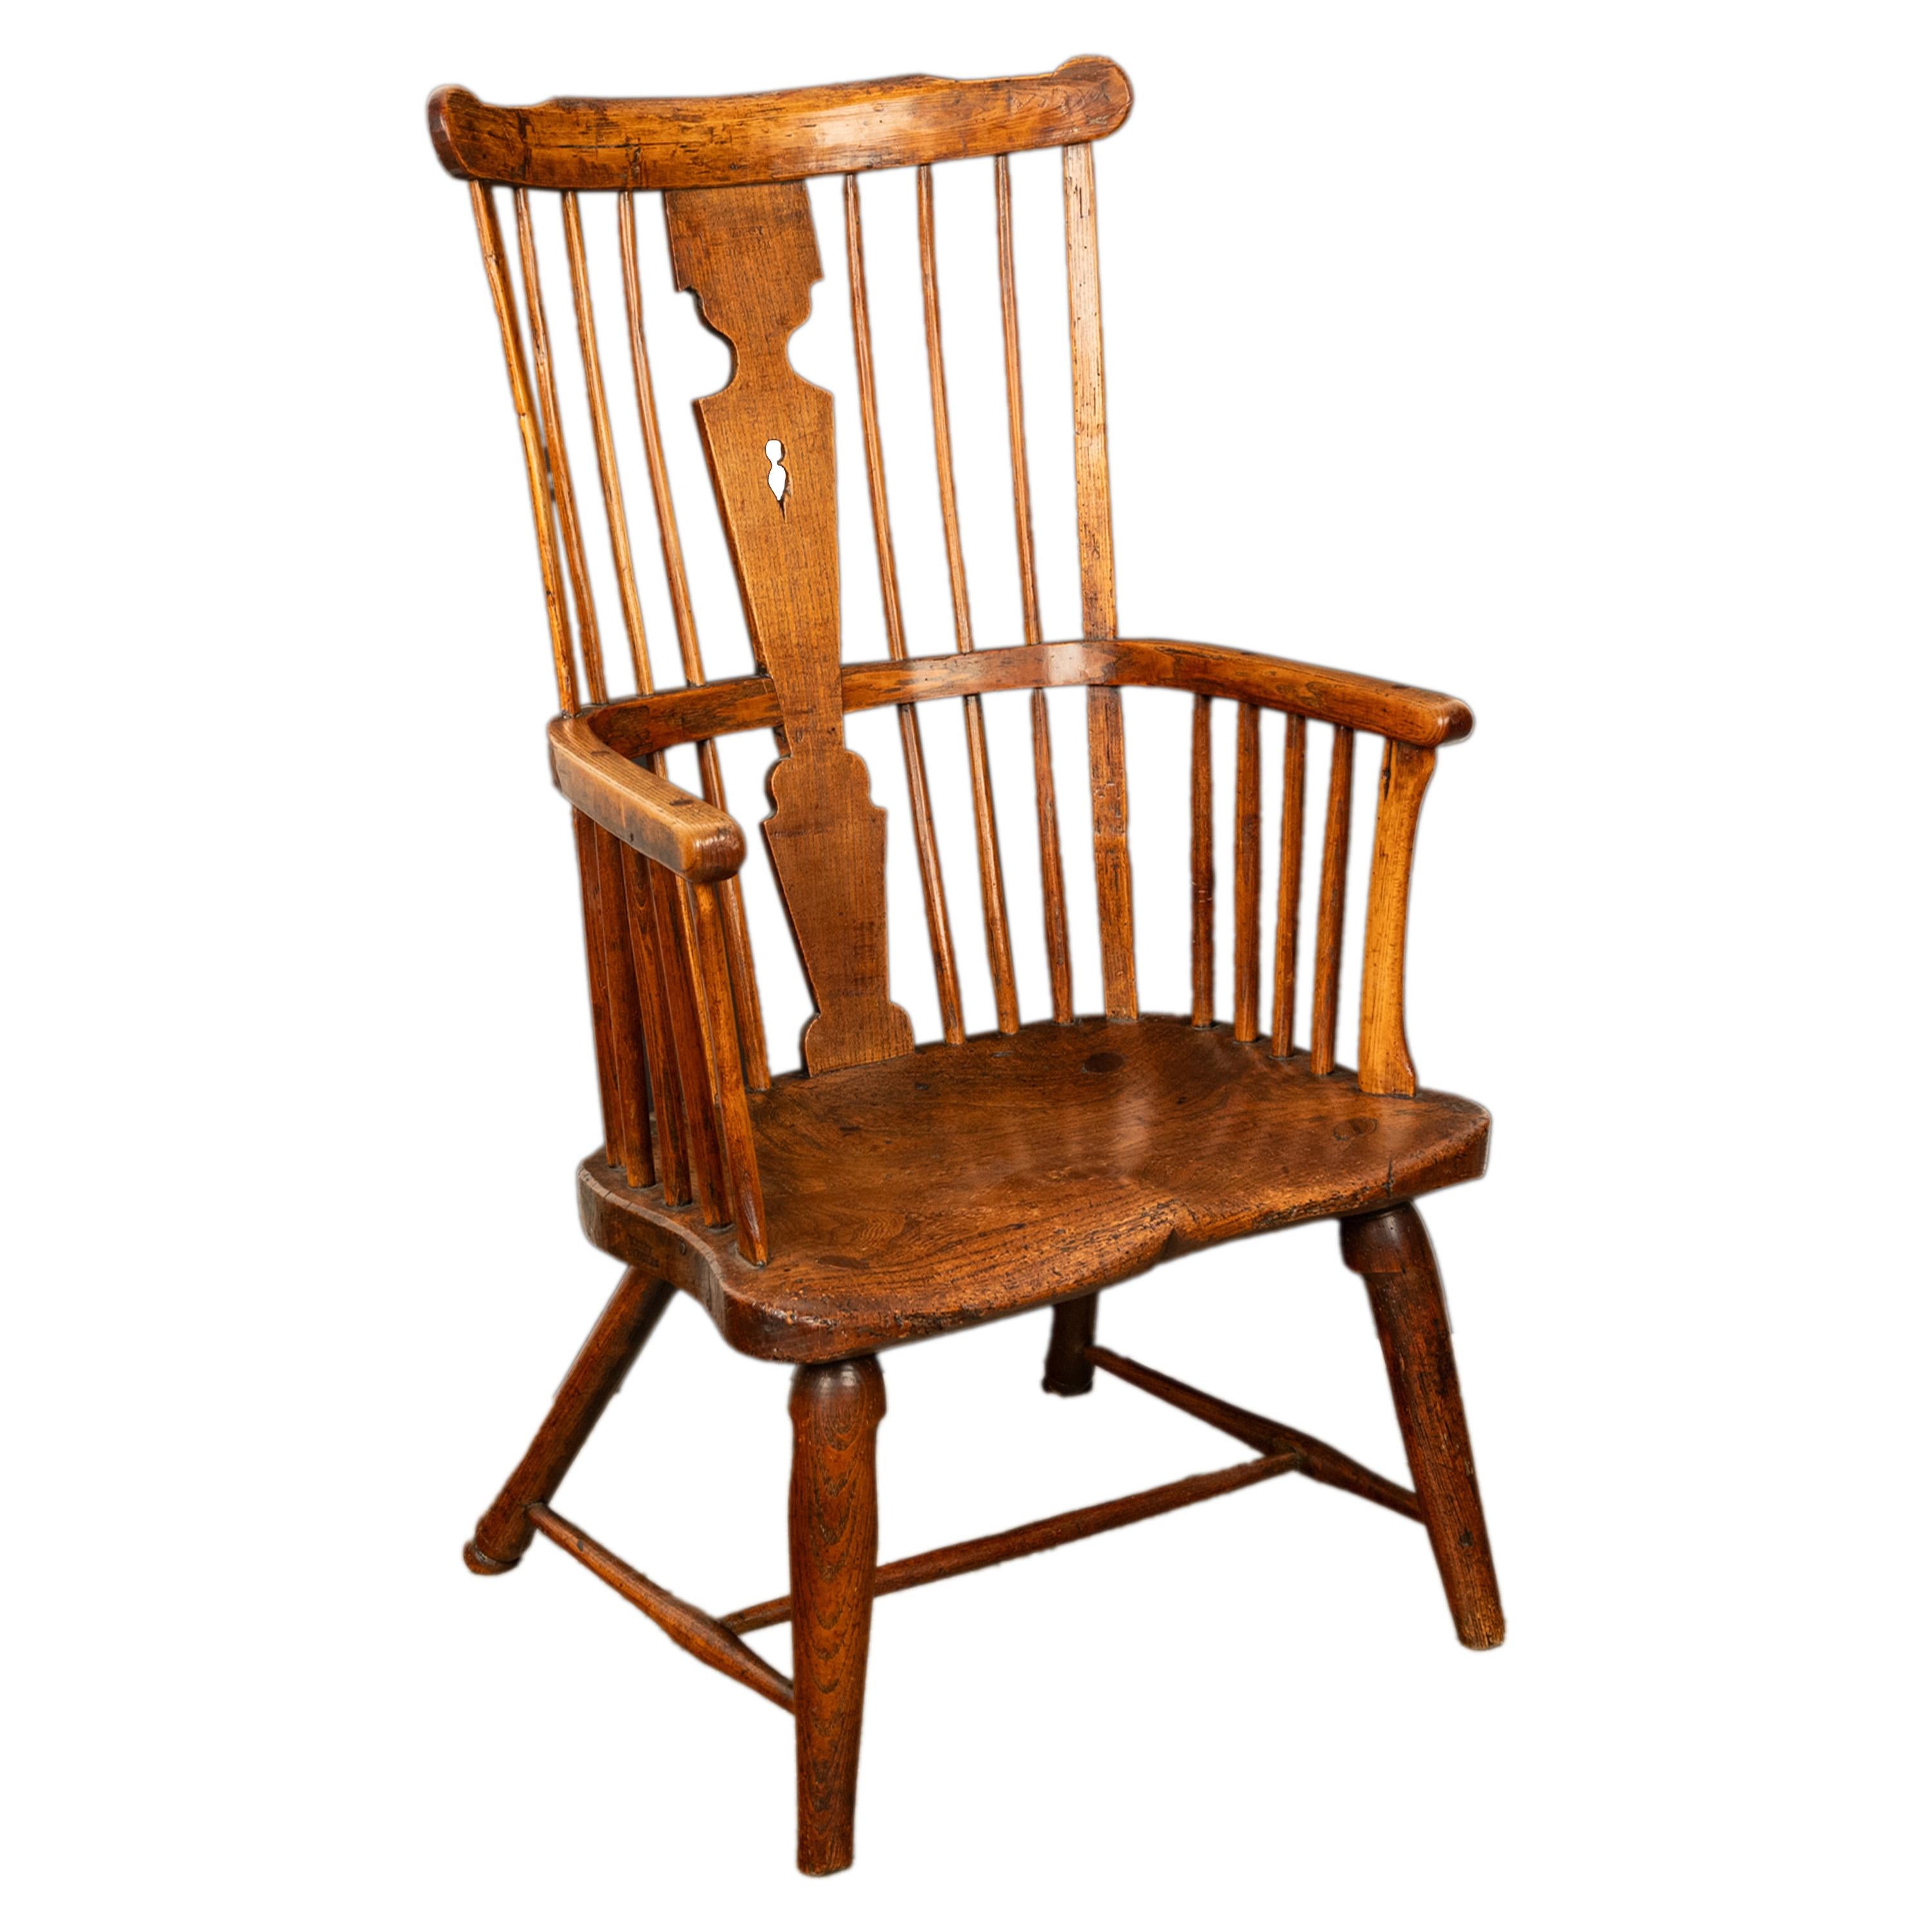 Important Antique Earliest Recorded English Windsor Chair by Kerry Evesham 1793 For Sale 2